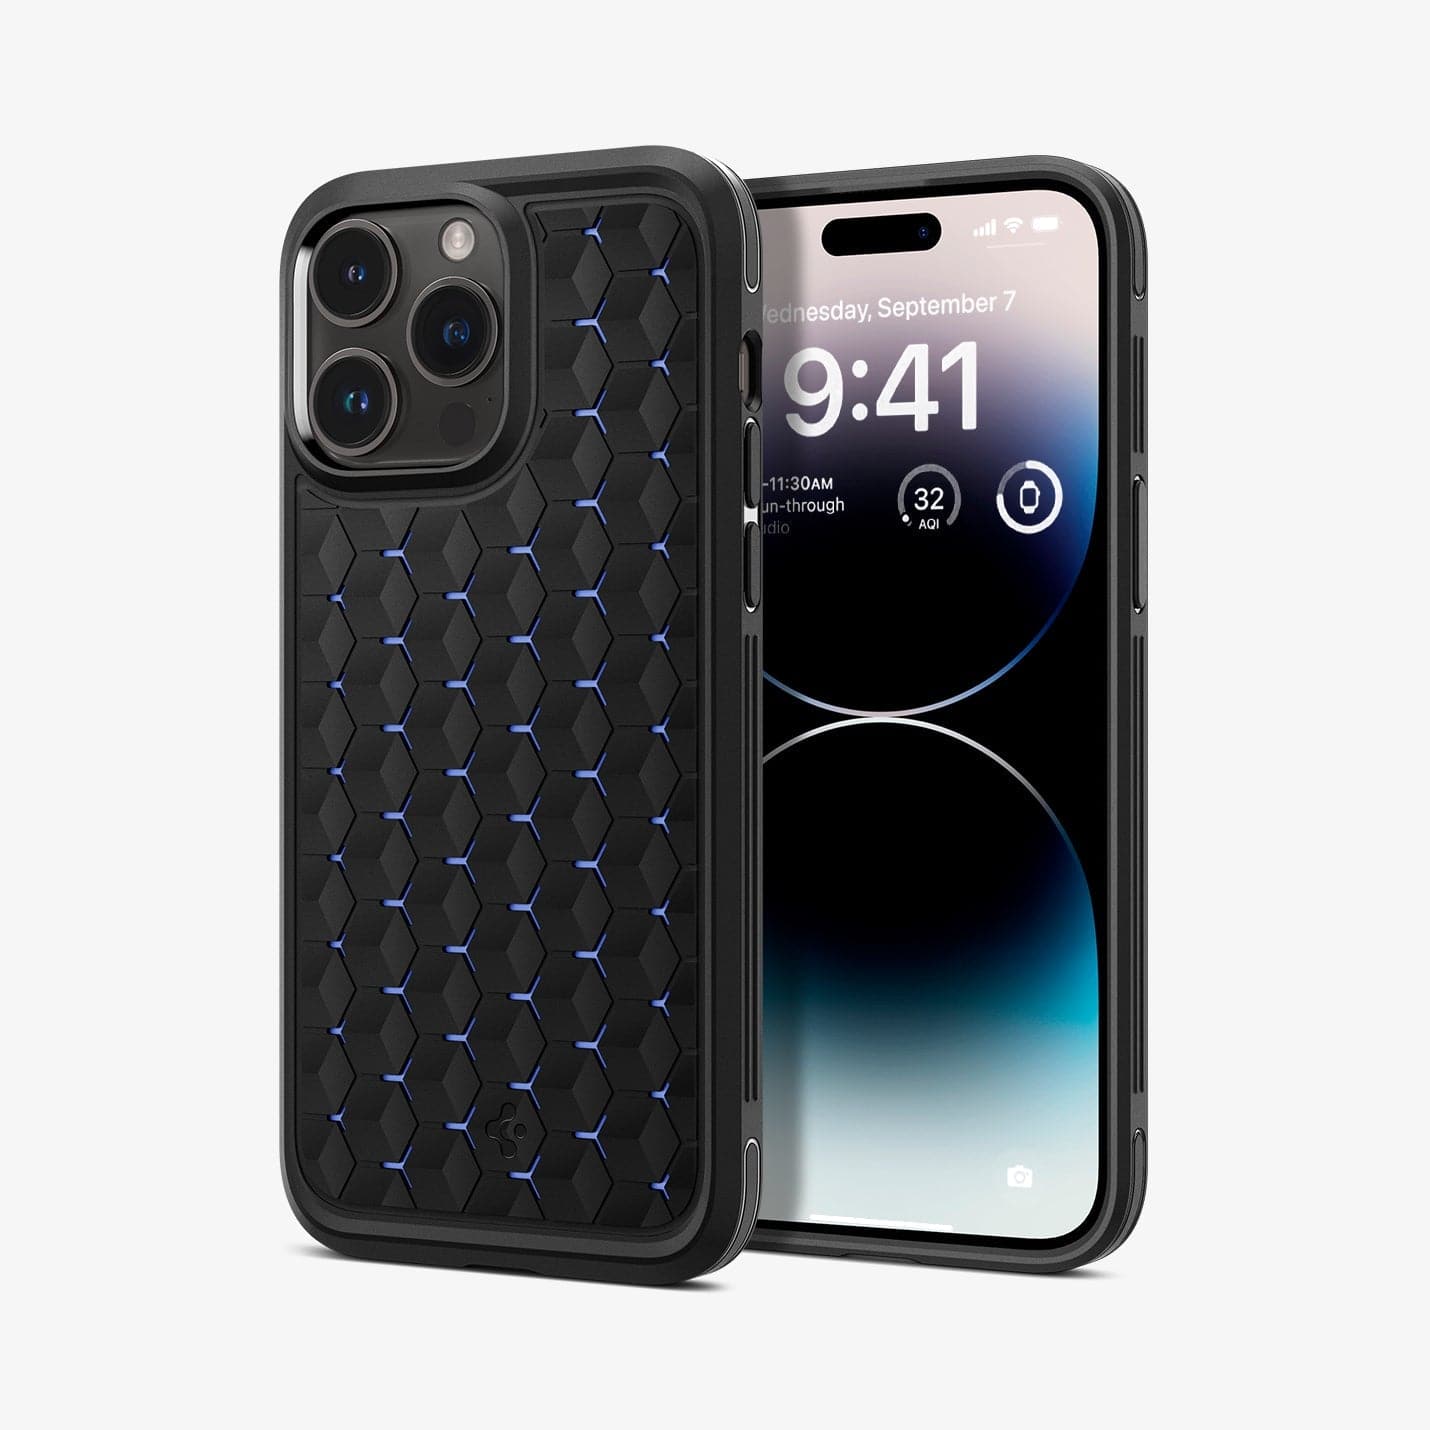 ACS04854 - iPhone 14 Pro Max Case Cryo Armor in matte black showing the back and front